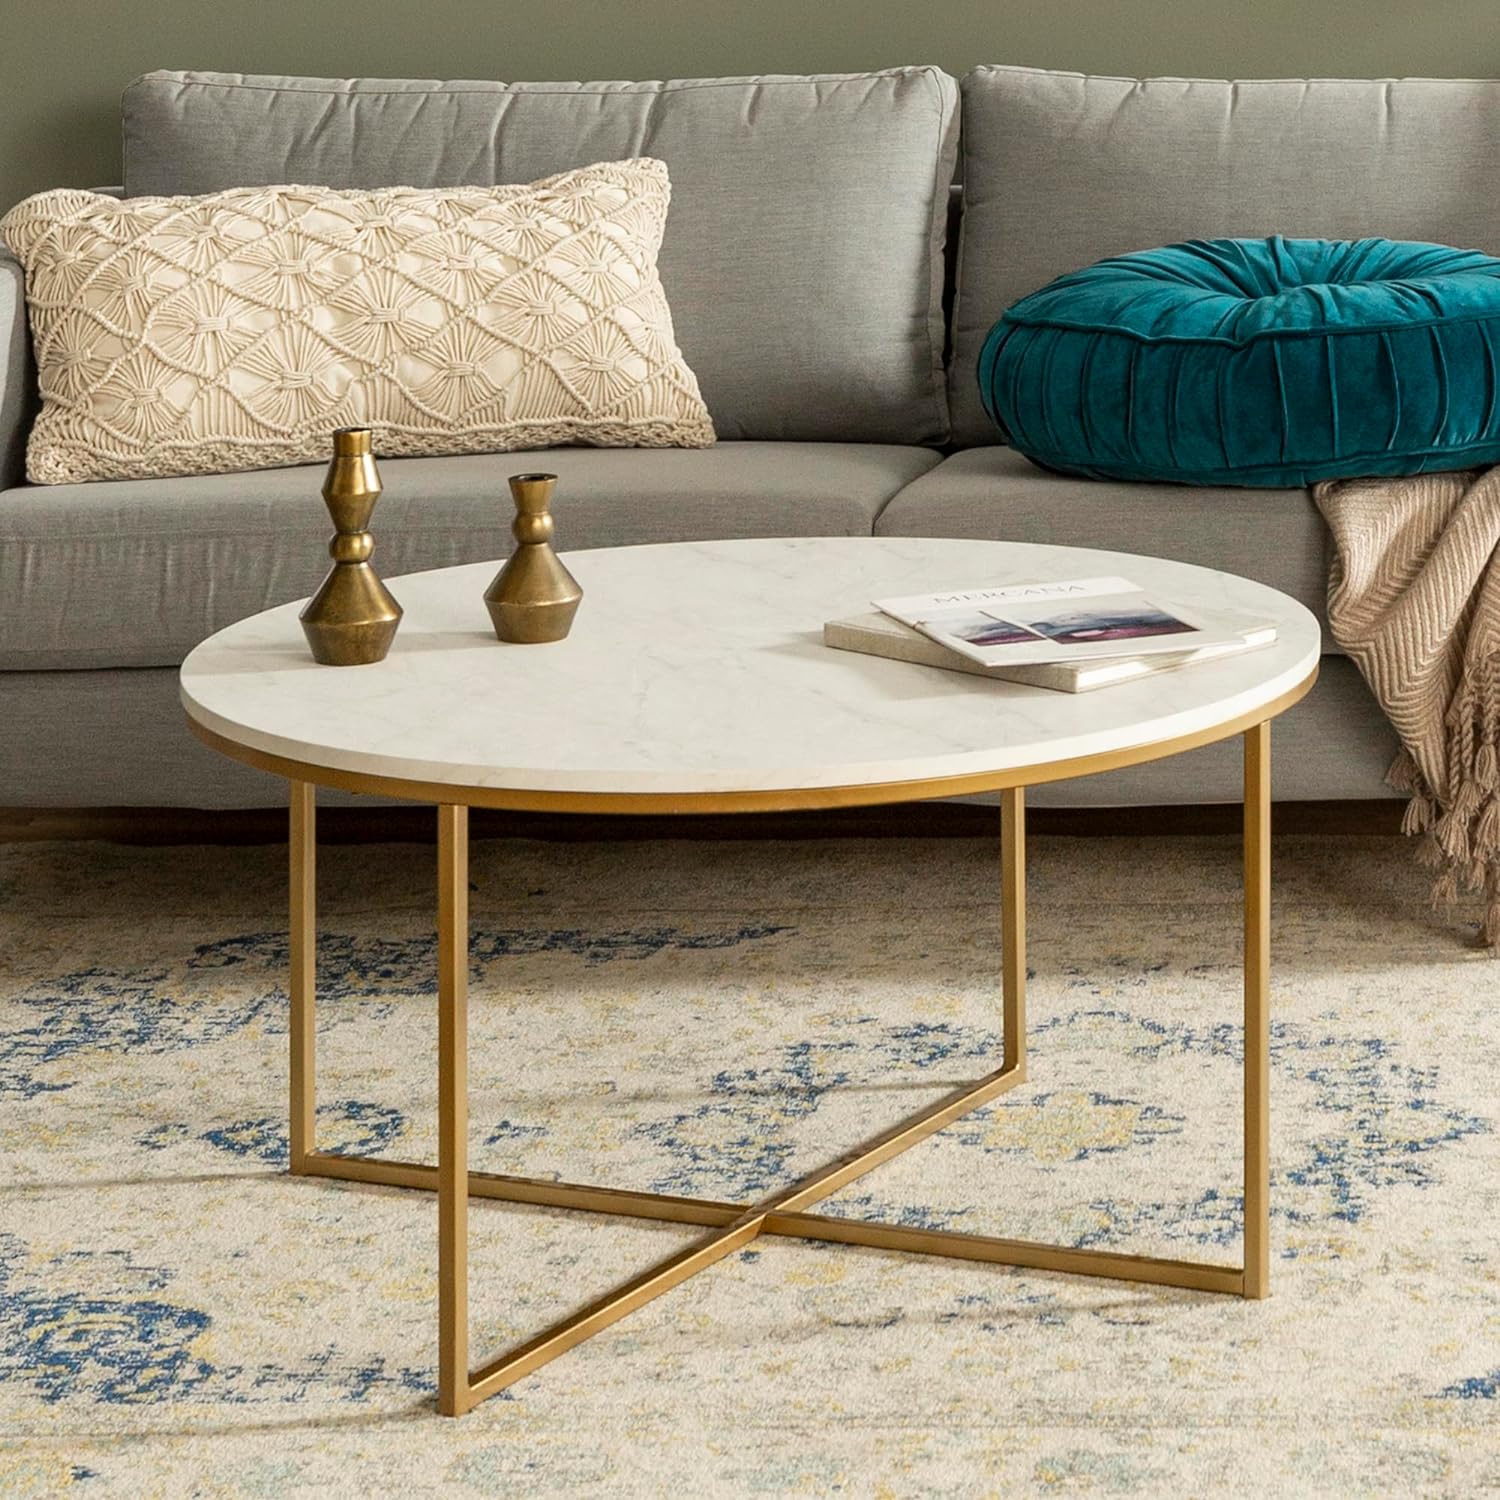 10 Must-Have Living Room Cocktail Tables That Will Elevate Your Space